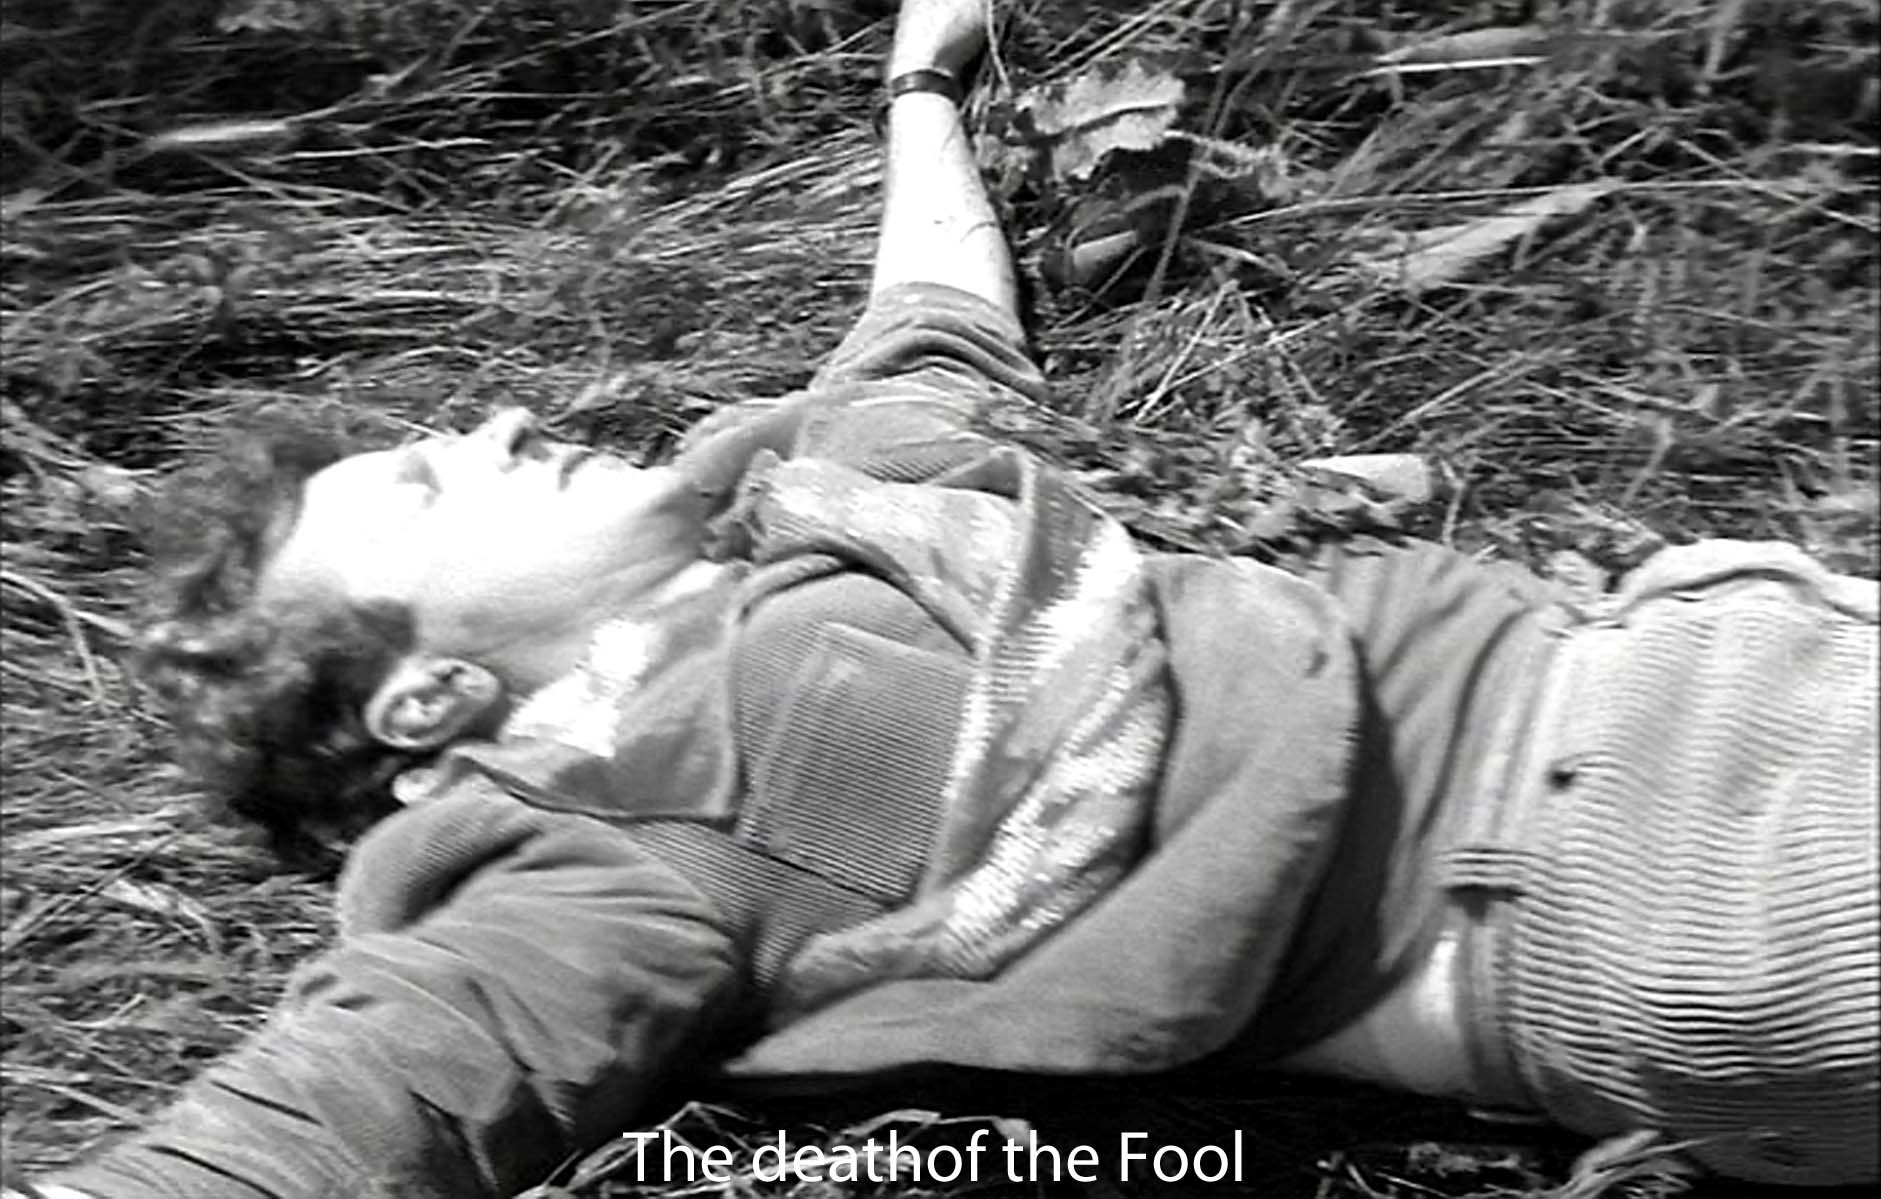 The death of the Fool